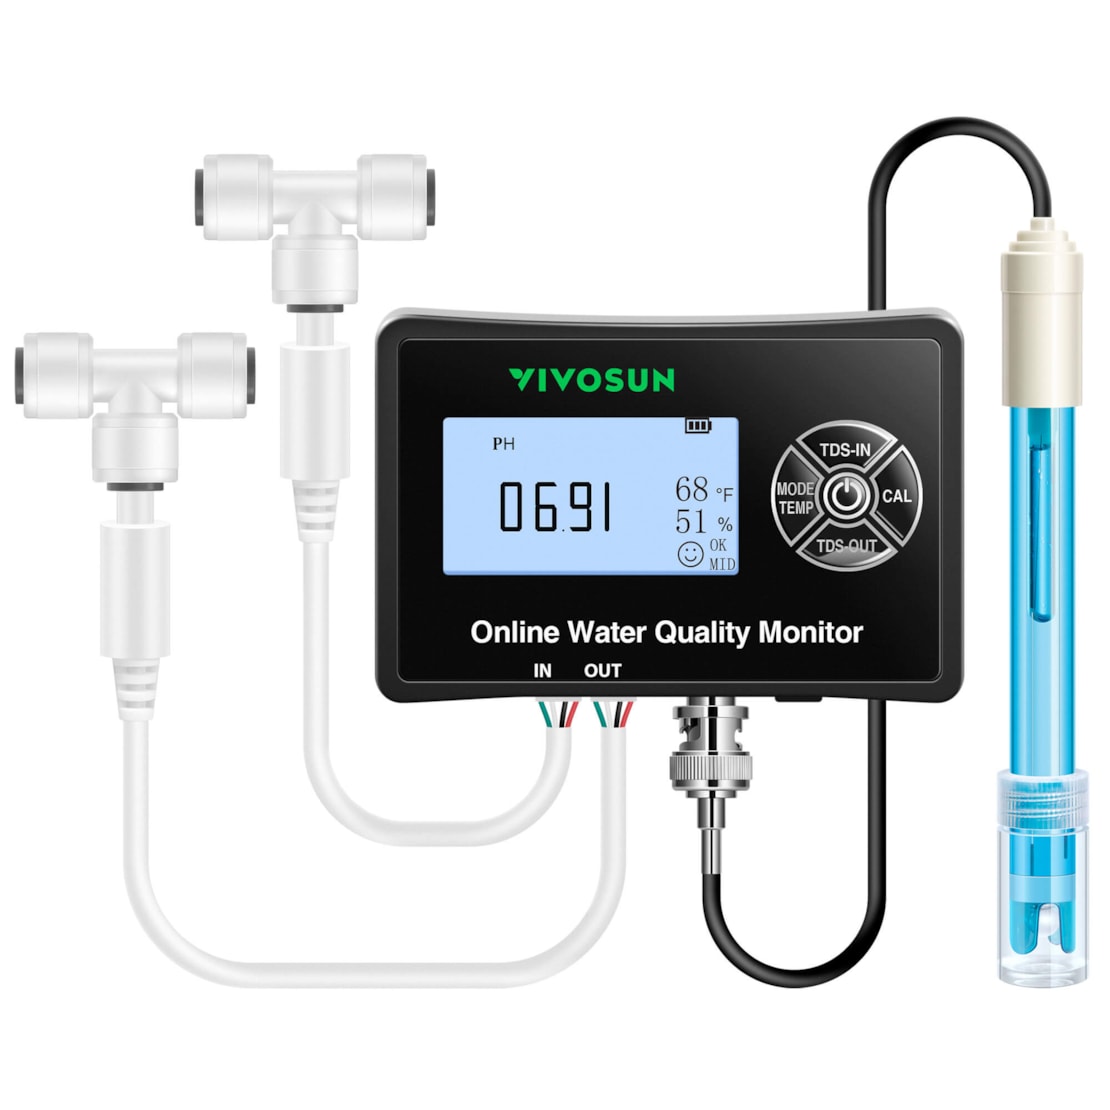 VIVOSUN 5-in-1 Water Quality Monitor with pH/TDS/EC/Temp/Humidity Function, Backlight Screen for Fish Tank, Water Purifier and Aquarium